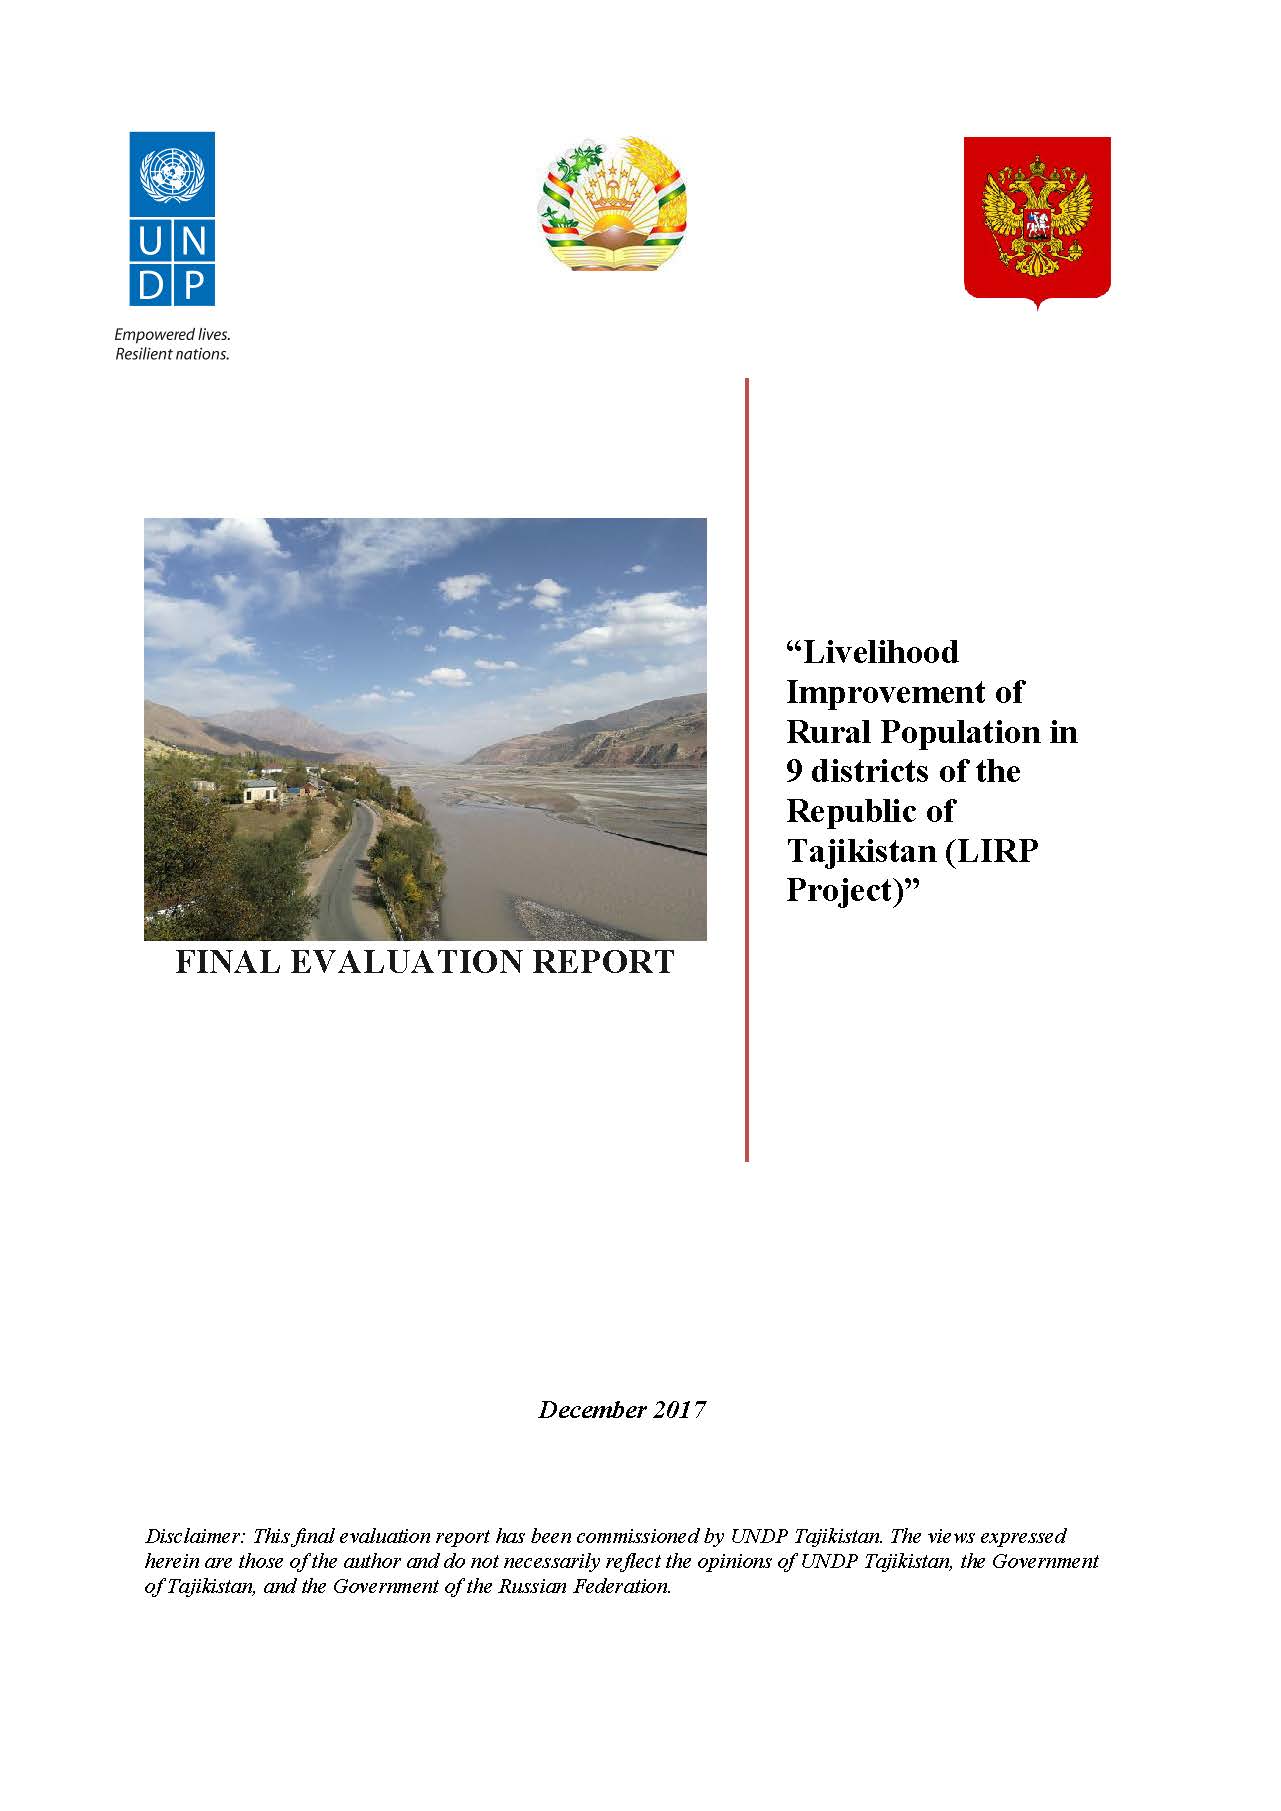 Final Evaluation of Livelihood Improvement for population of 9 districts of Tajikistan (LIRP) project